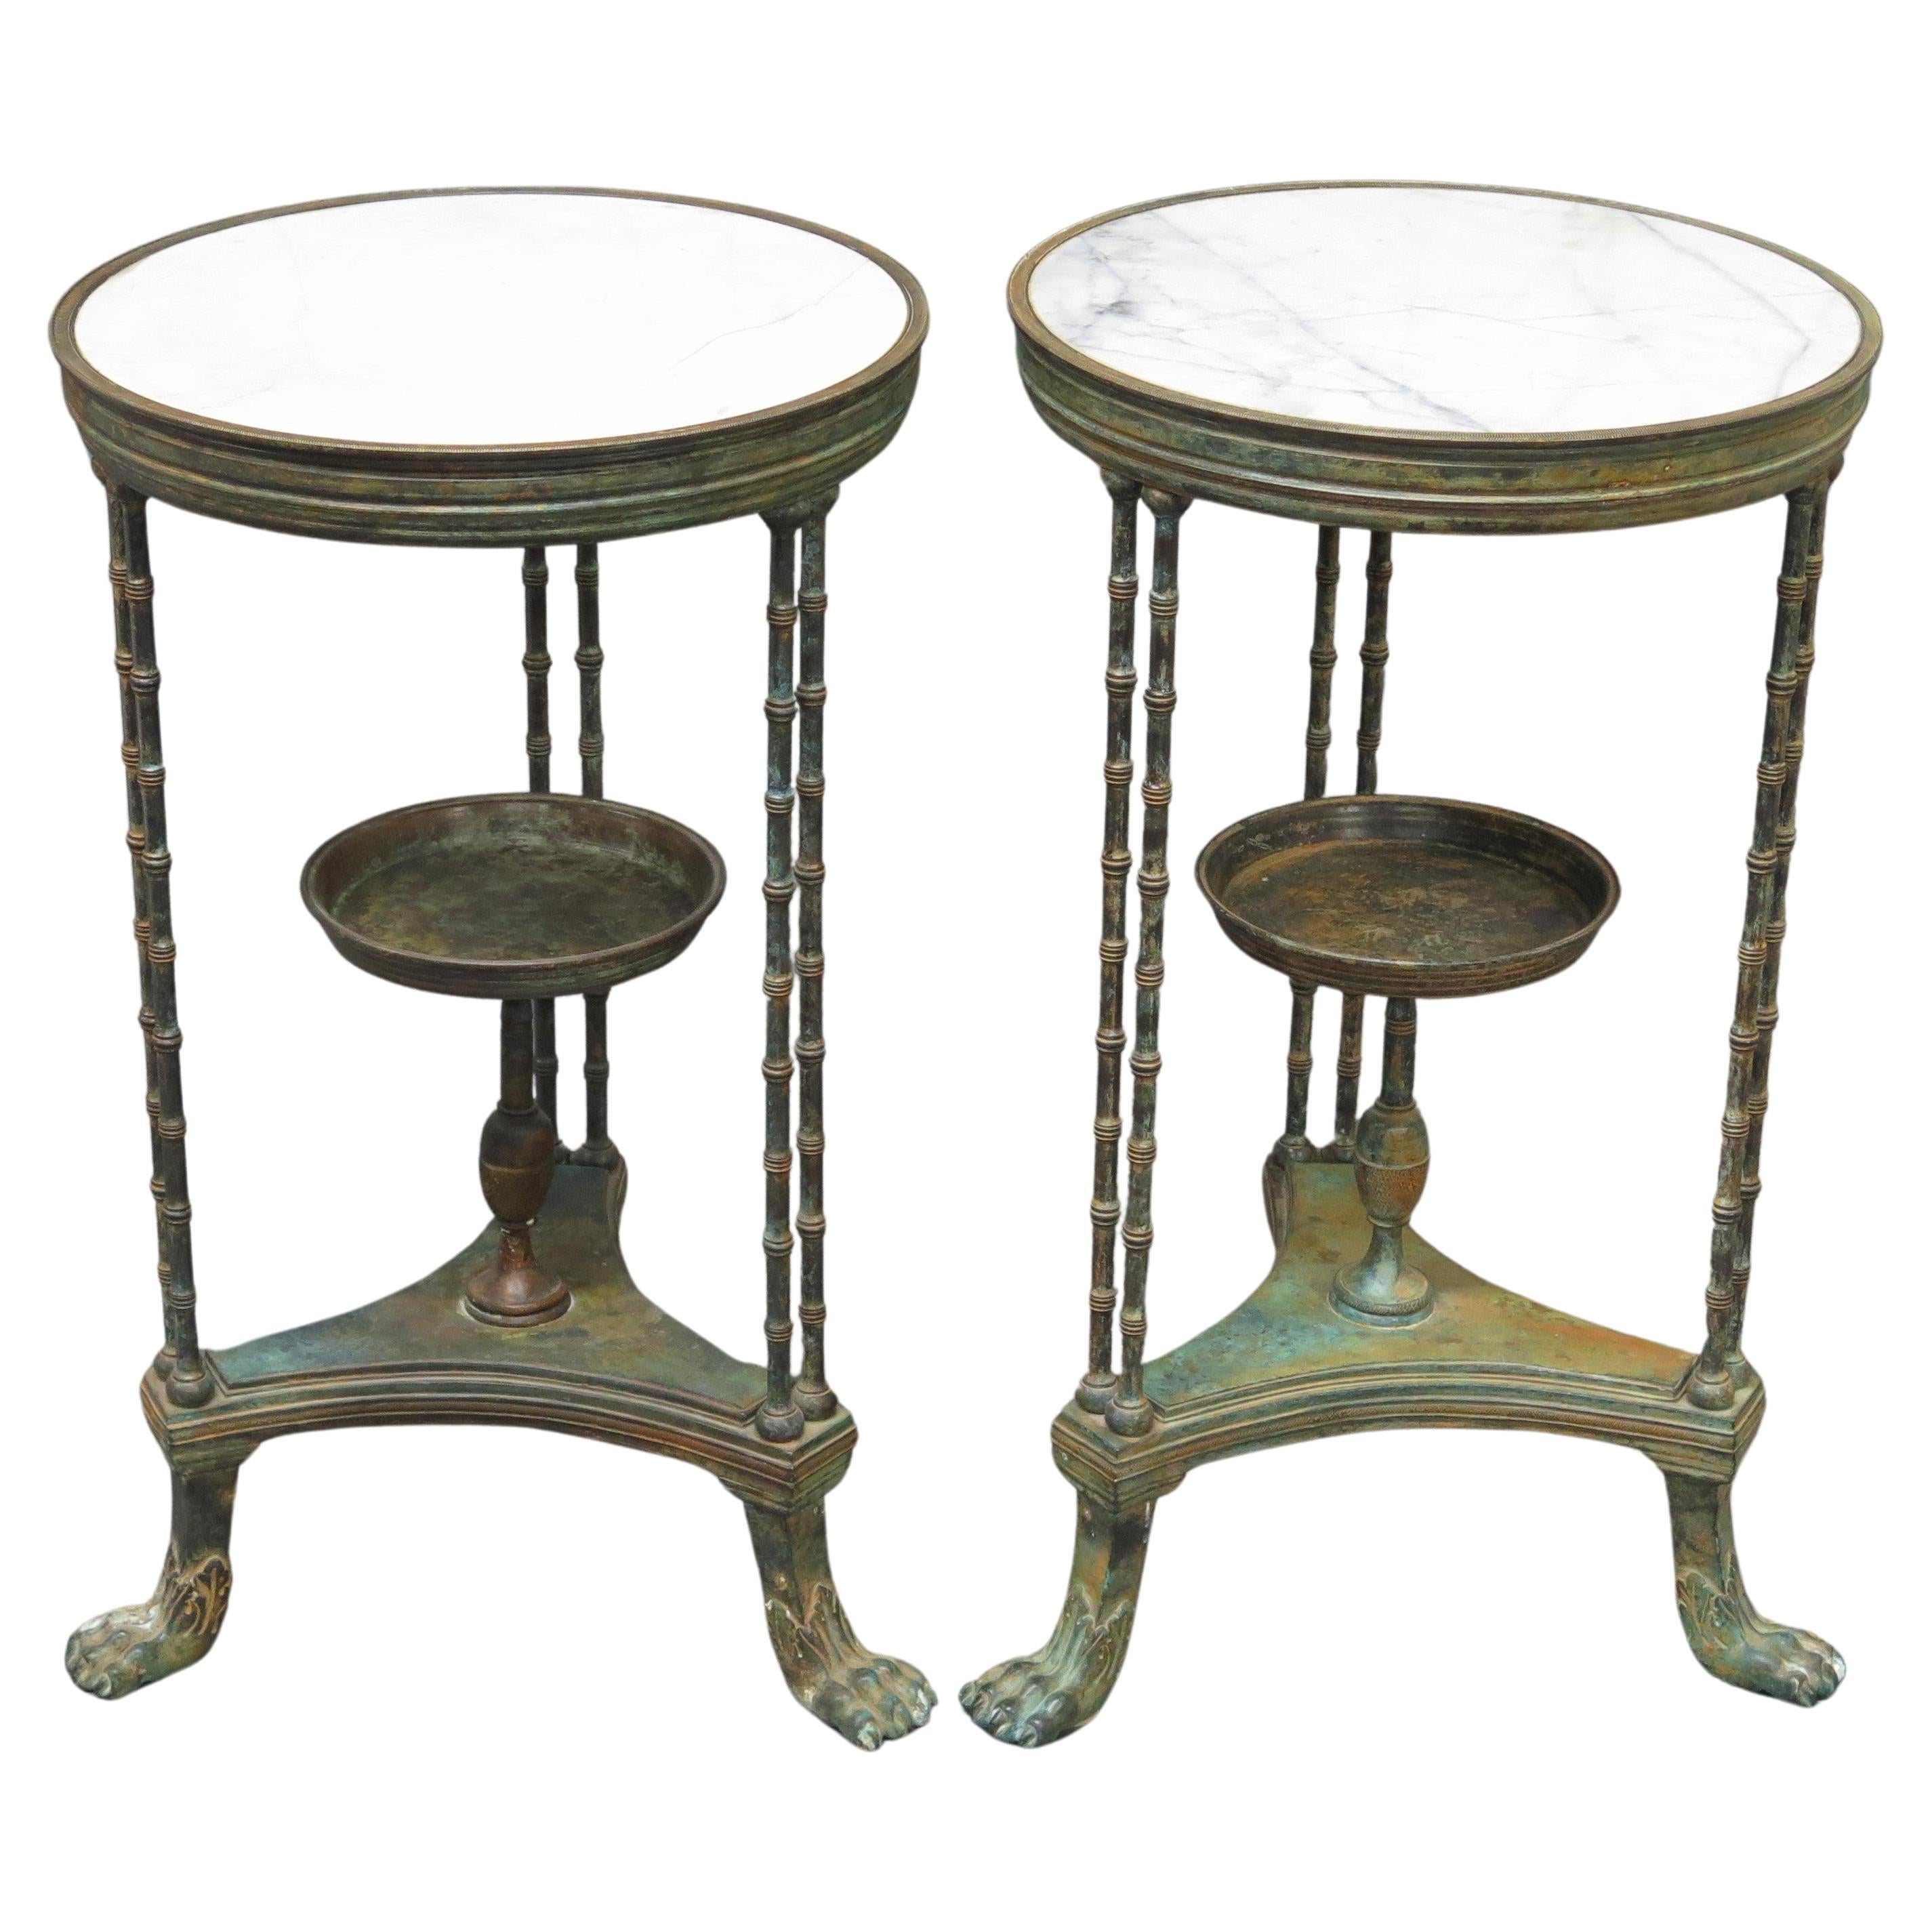 Pair of Louis XVI-Style Patinated Bronze Gueridons (Tables) For Sale